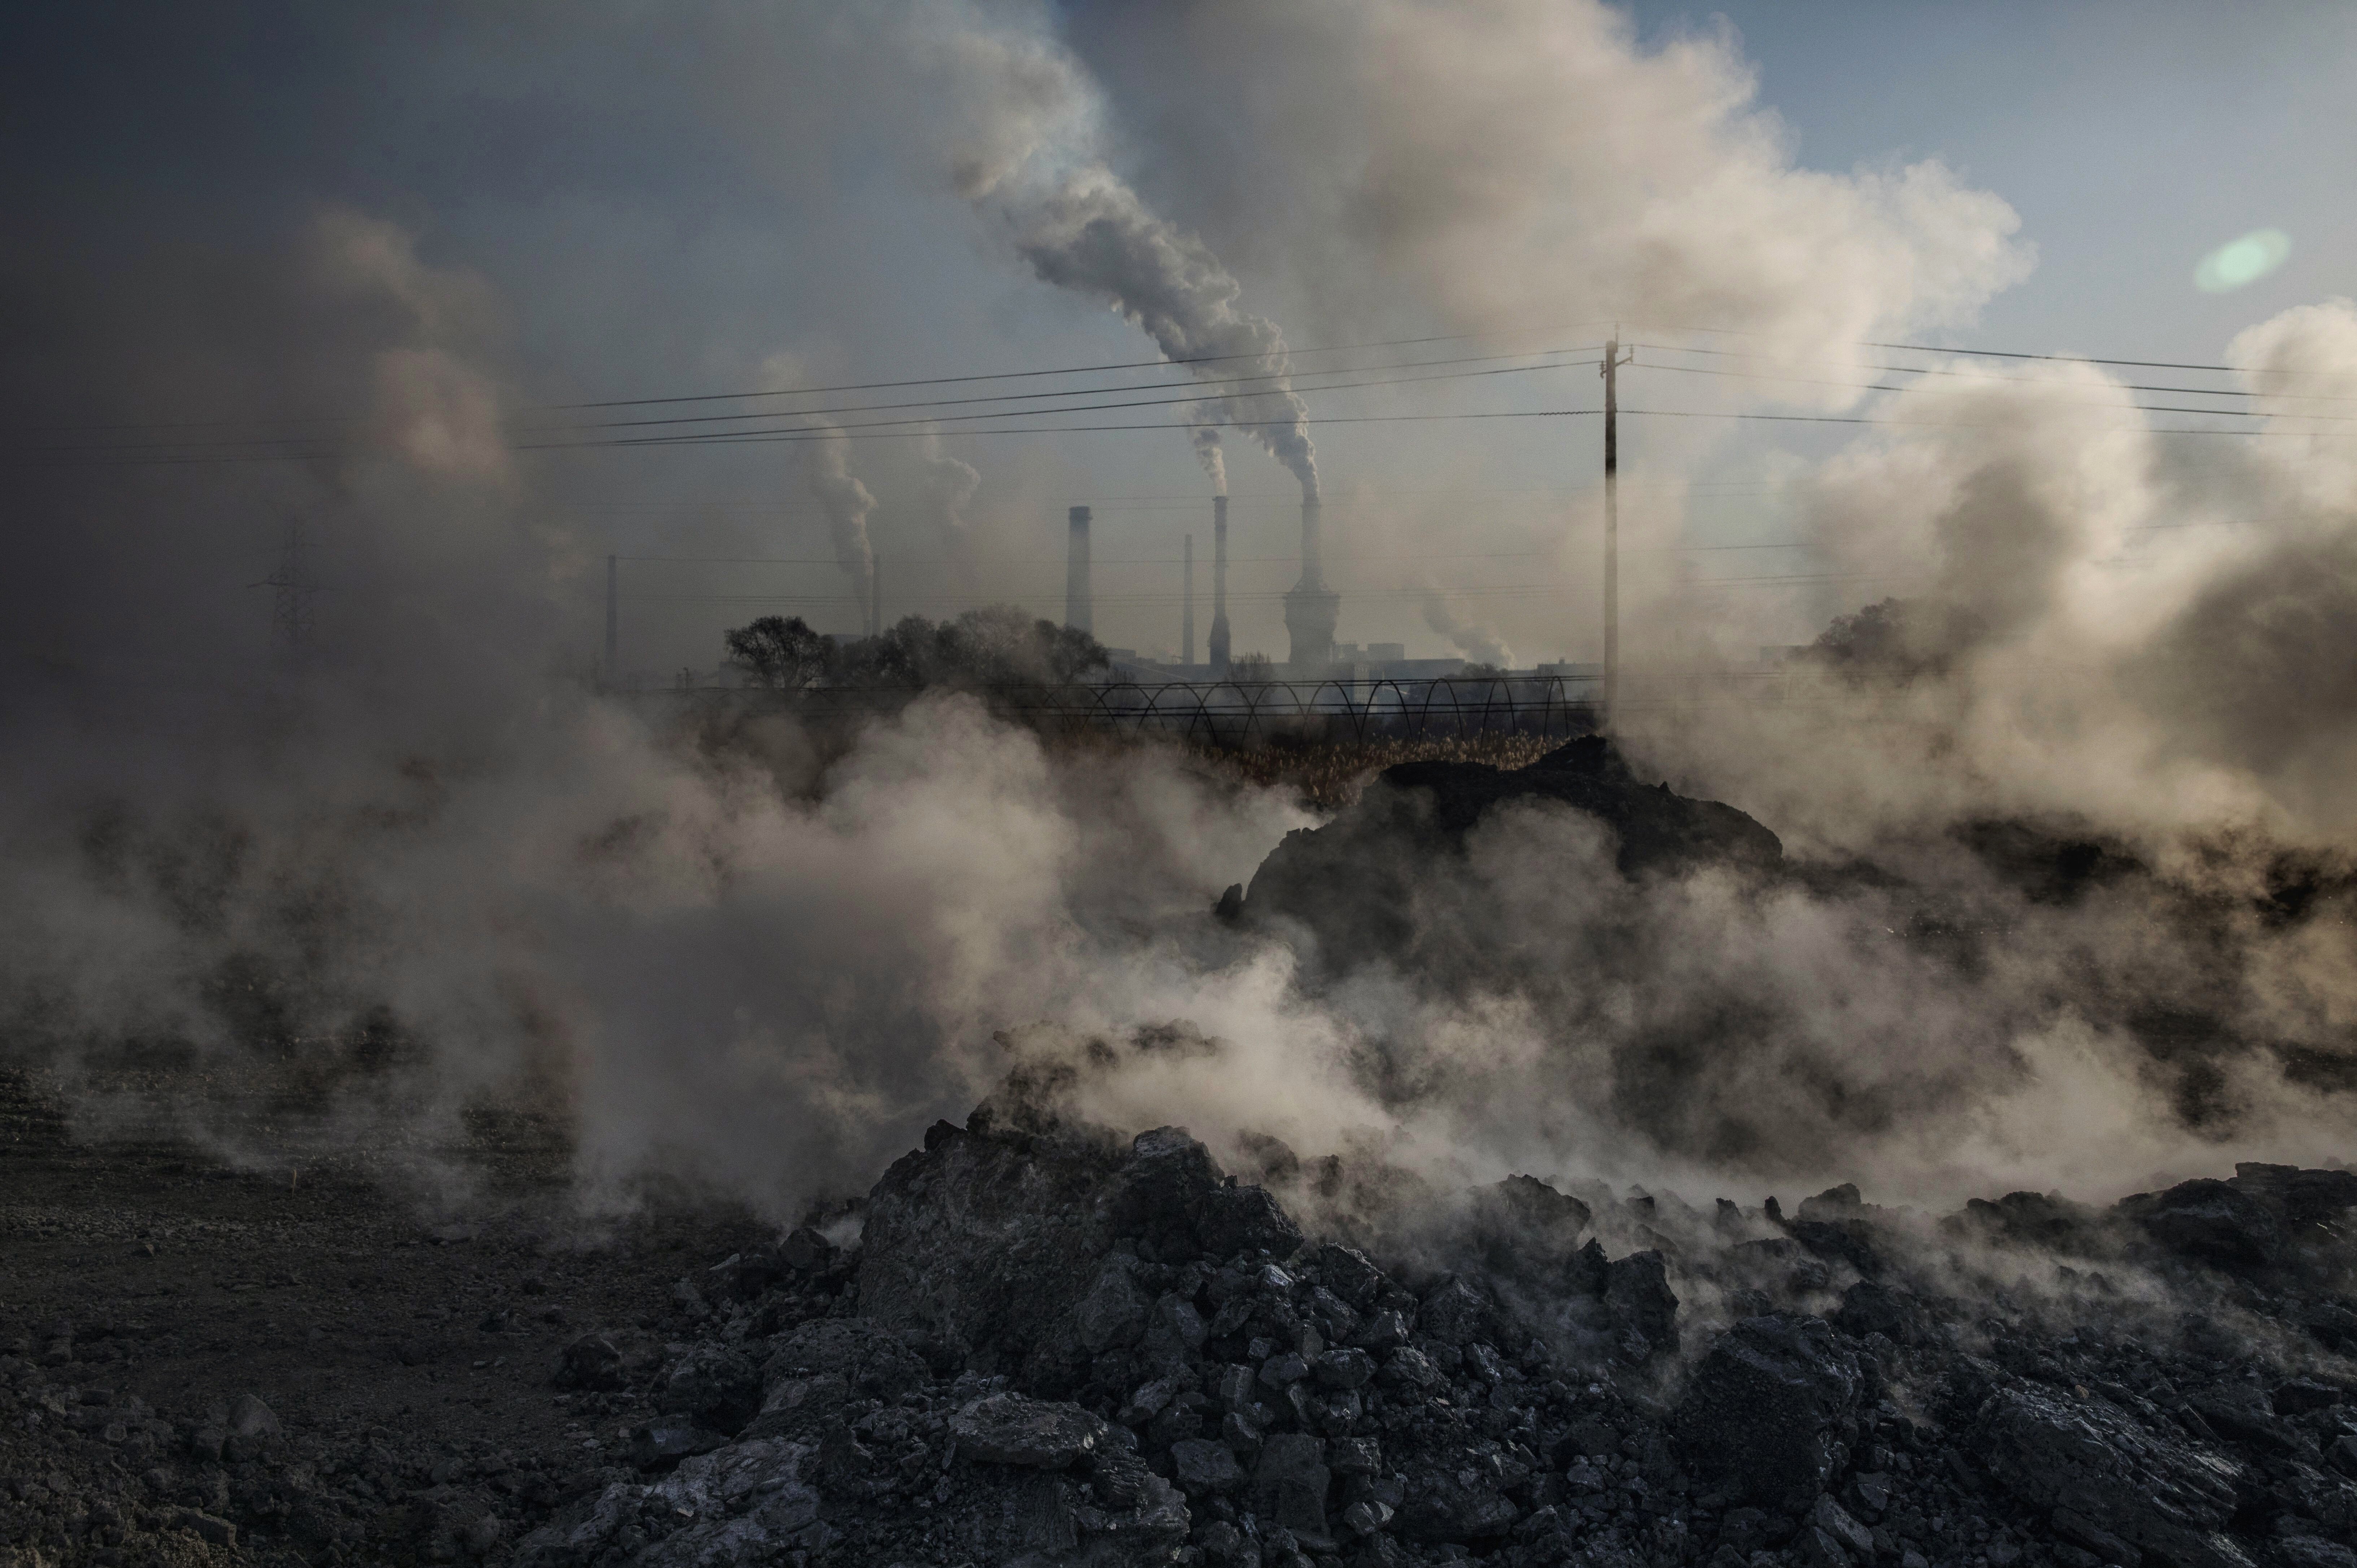 An unauthorised steel factory in Inner Mongolia. Moving the focus away from growth could enable China to focus on other matters, such as the environment. Photo: Getty Images